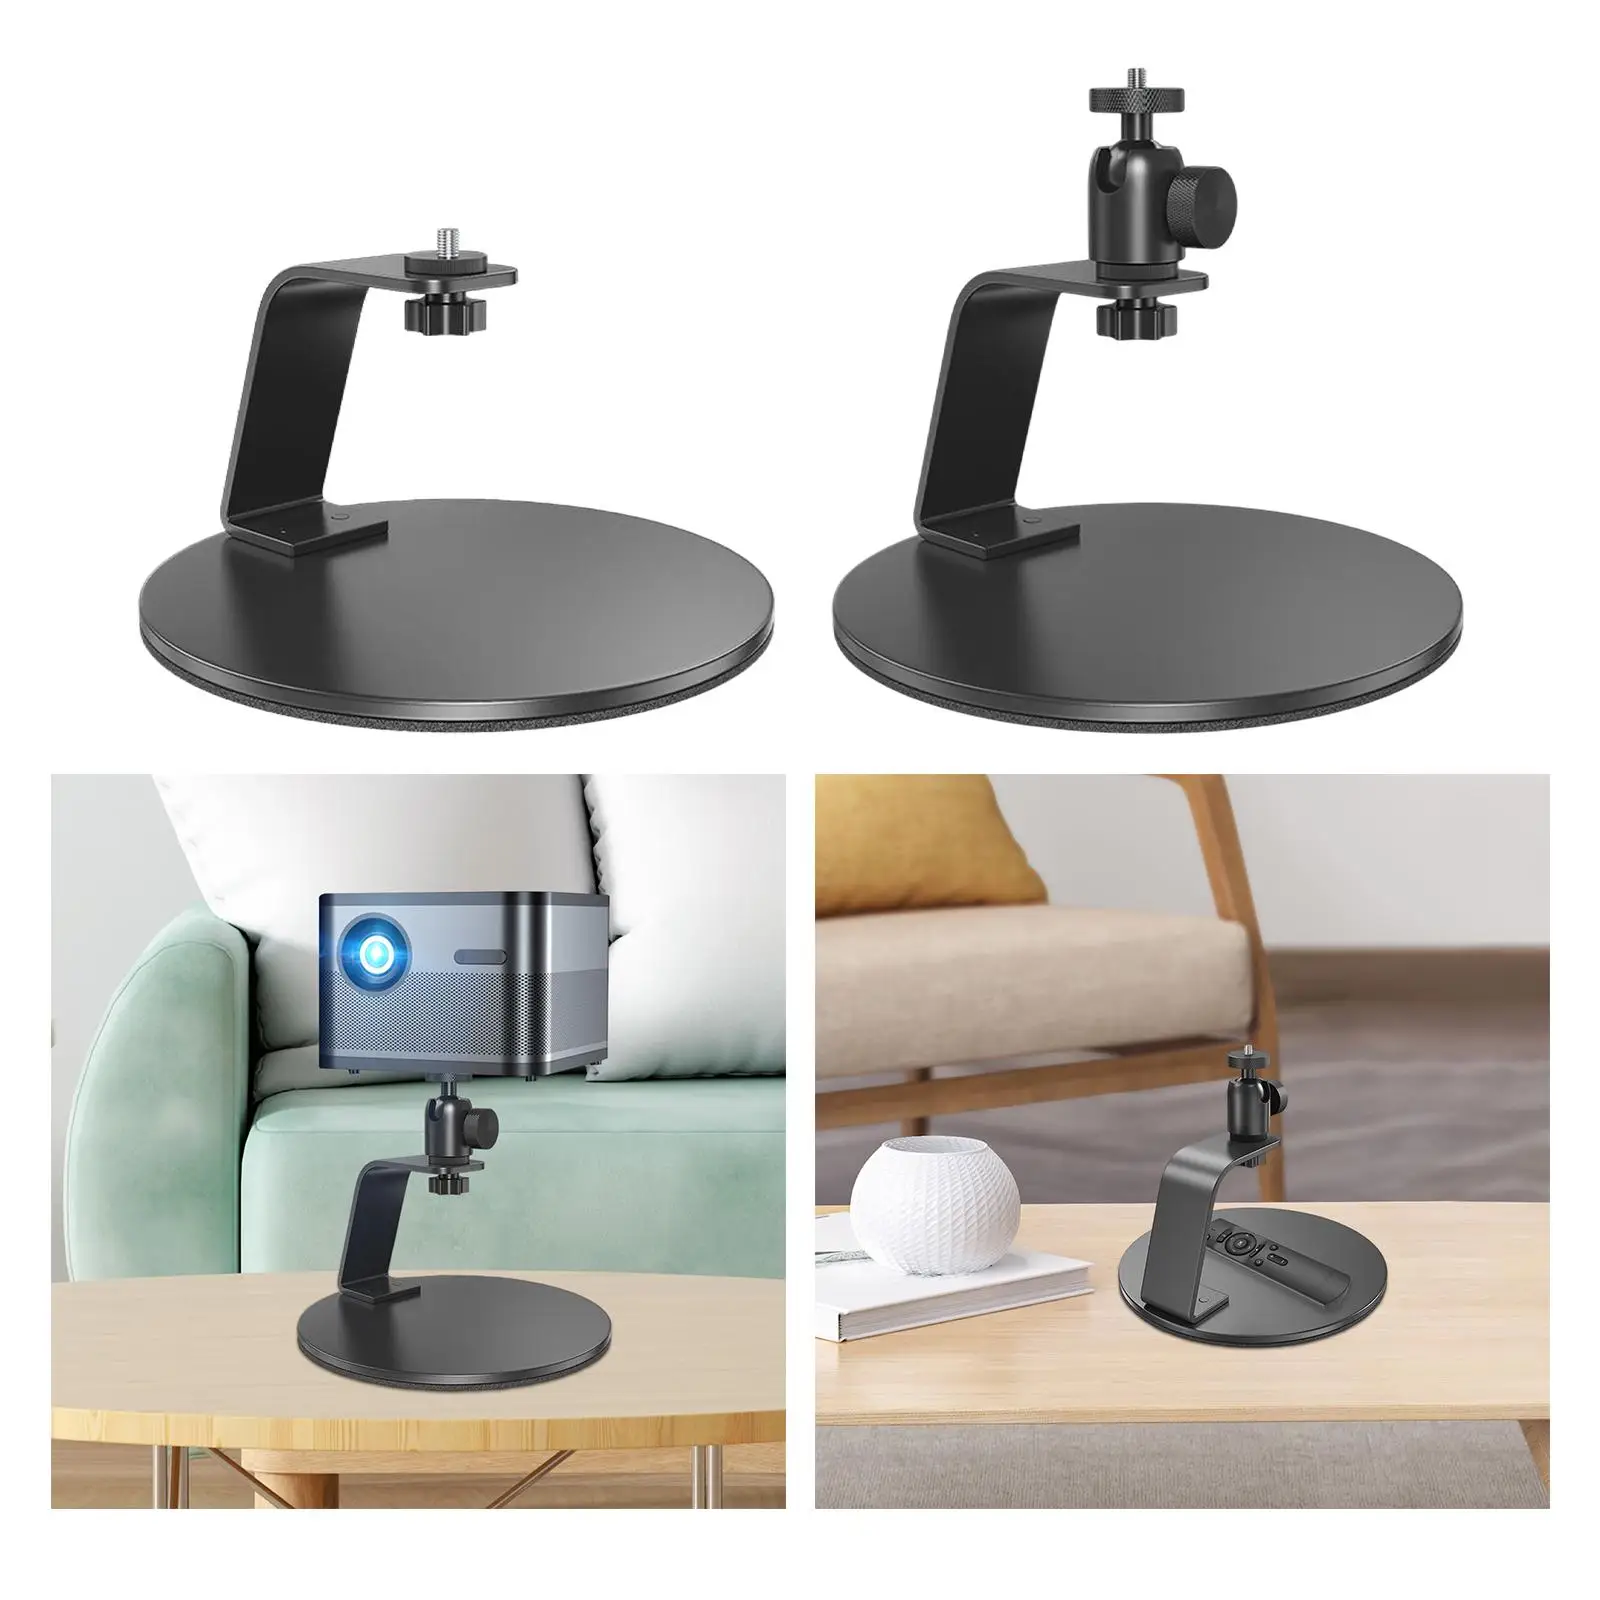 Desktop Projector Stand Accessories 1/4 Screw Interface Mount Stand for Bedside H2 H1 Z6x